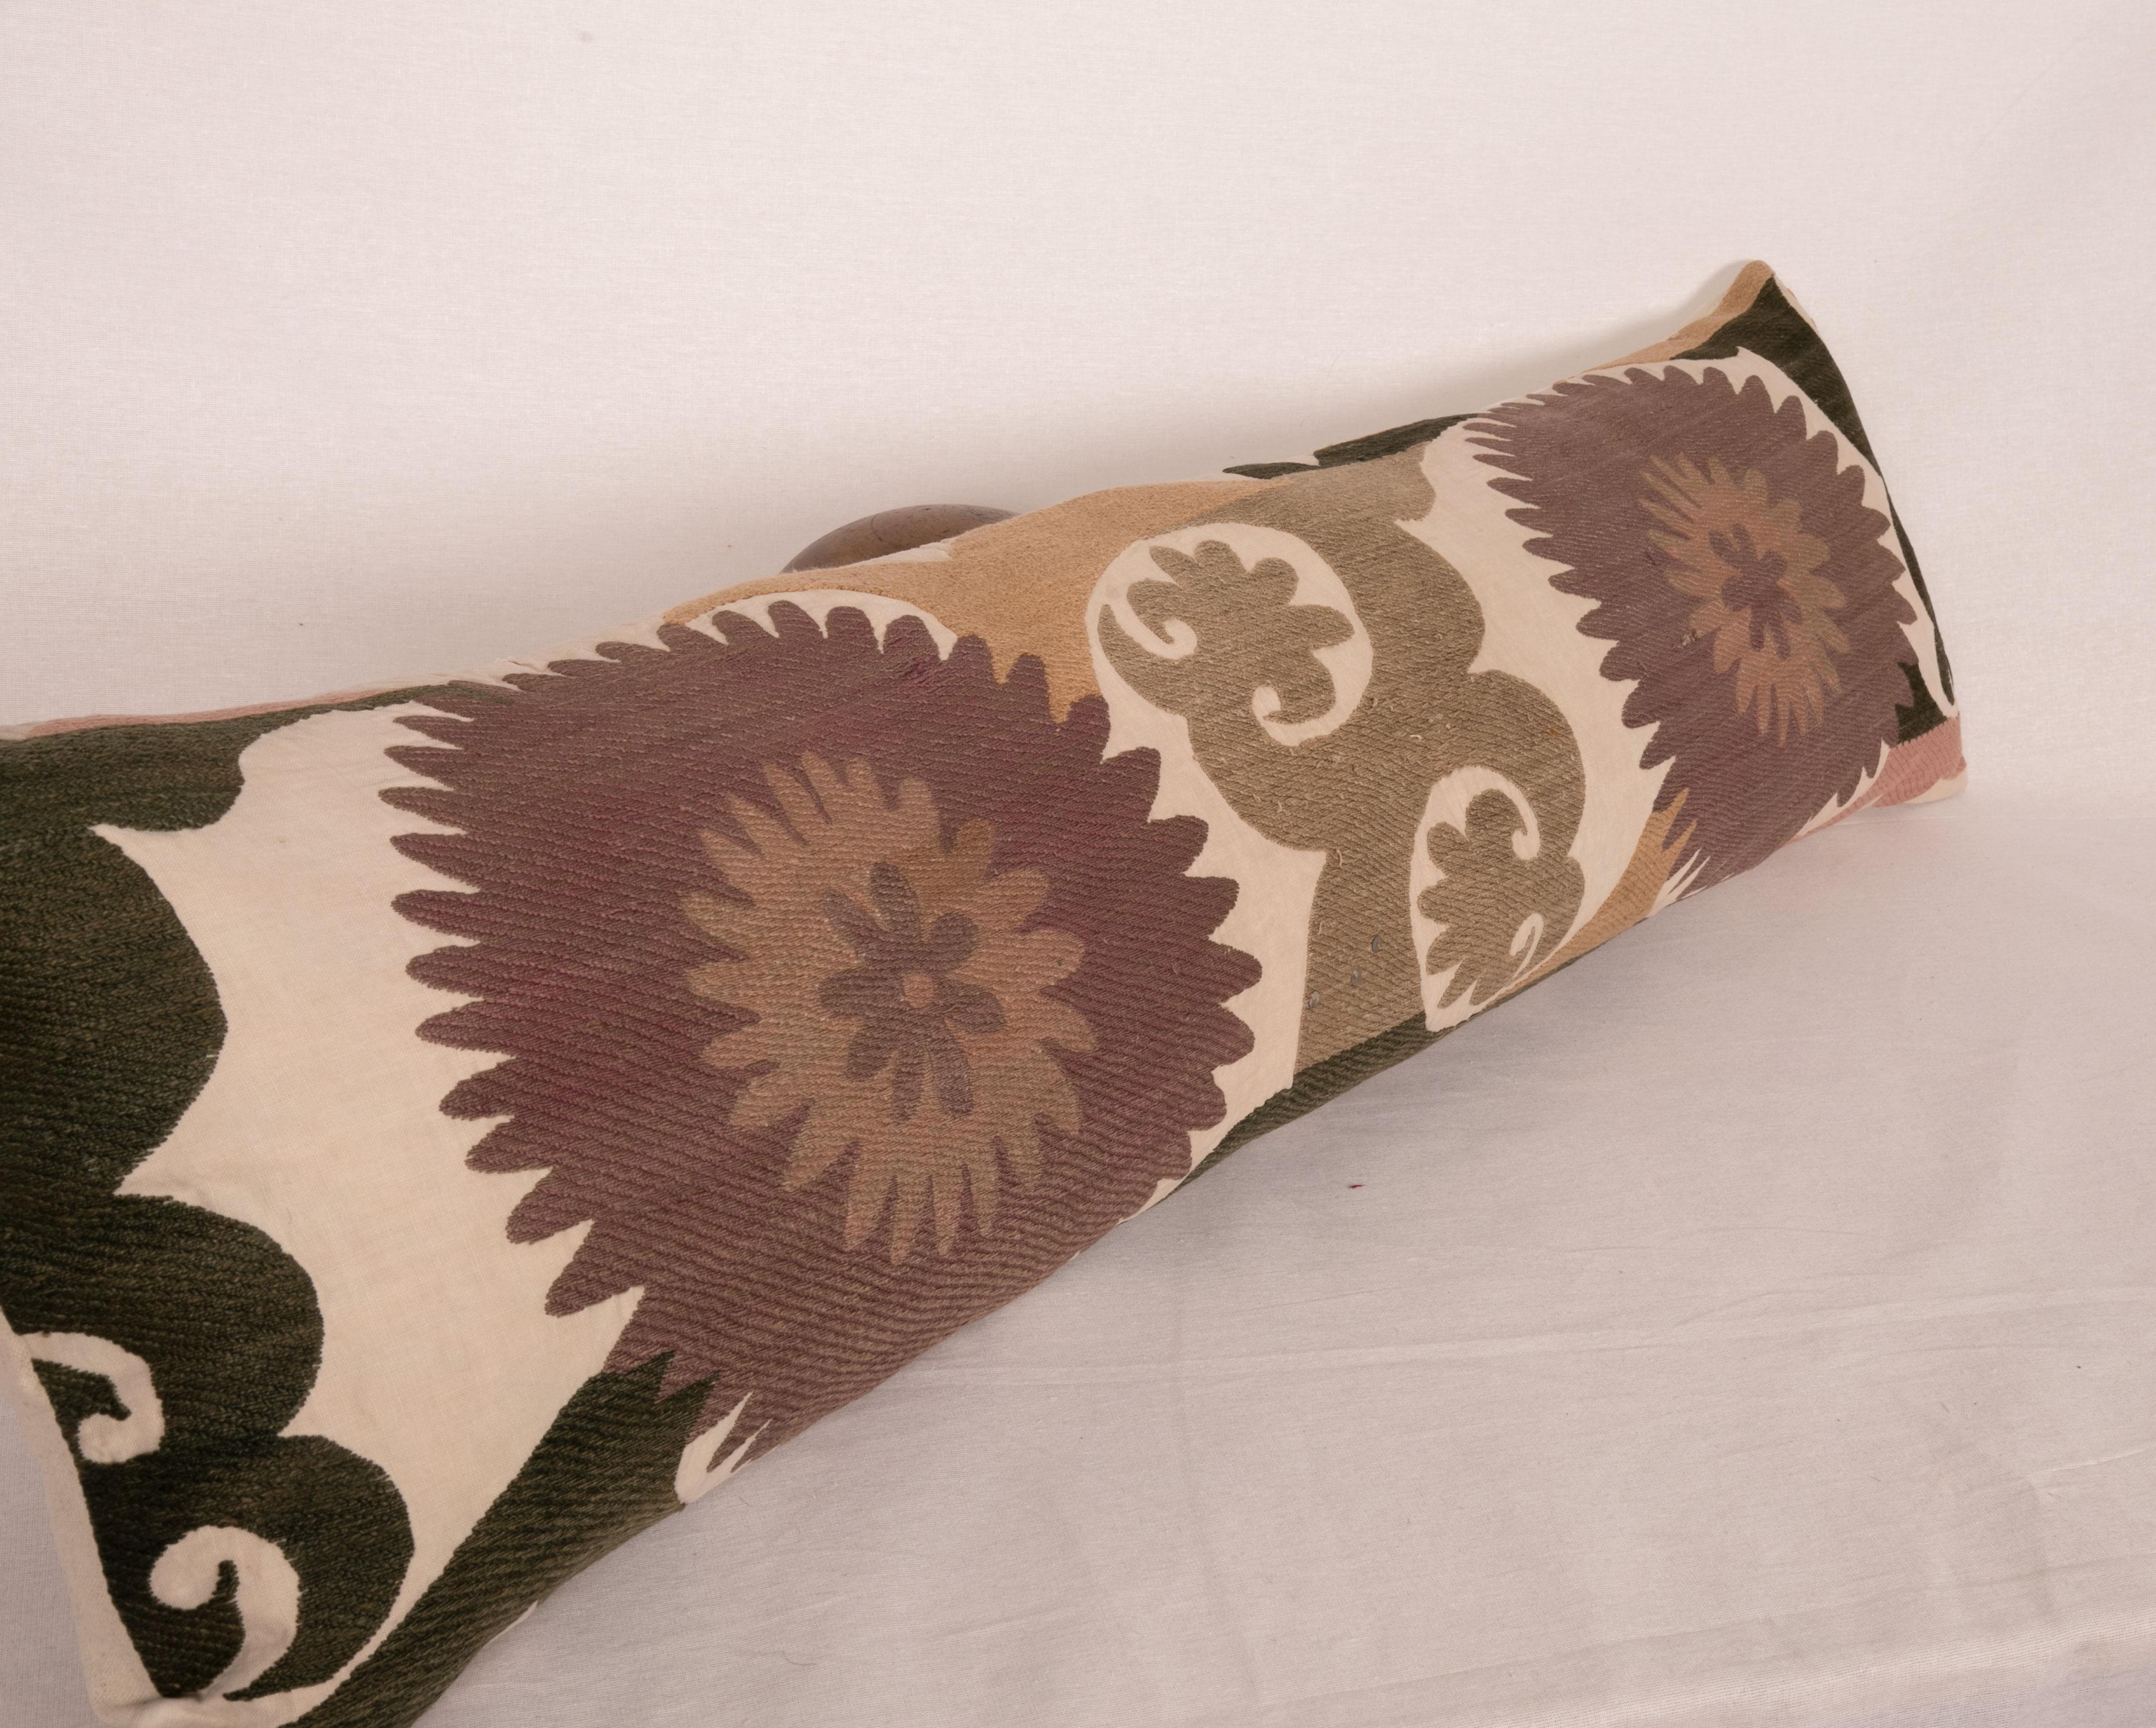 20th Century Lumbar Pillow Case Made from an Early 20th C. Suzani, 1920s